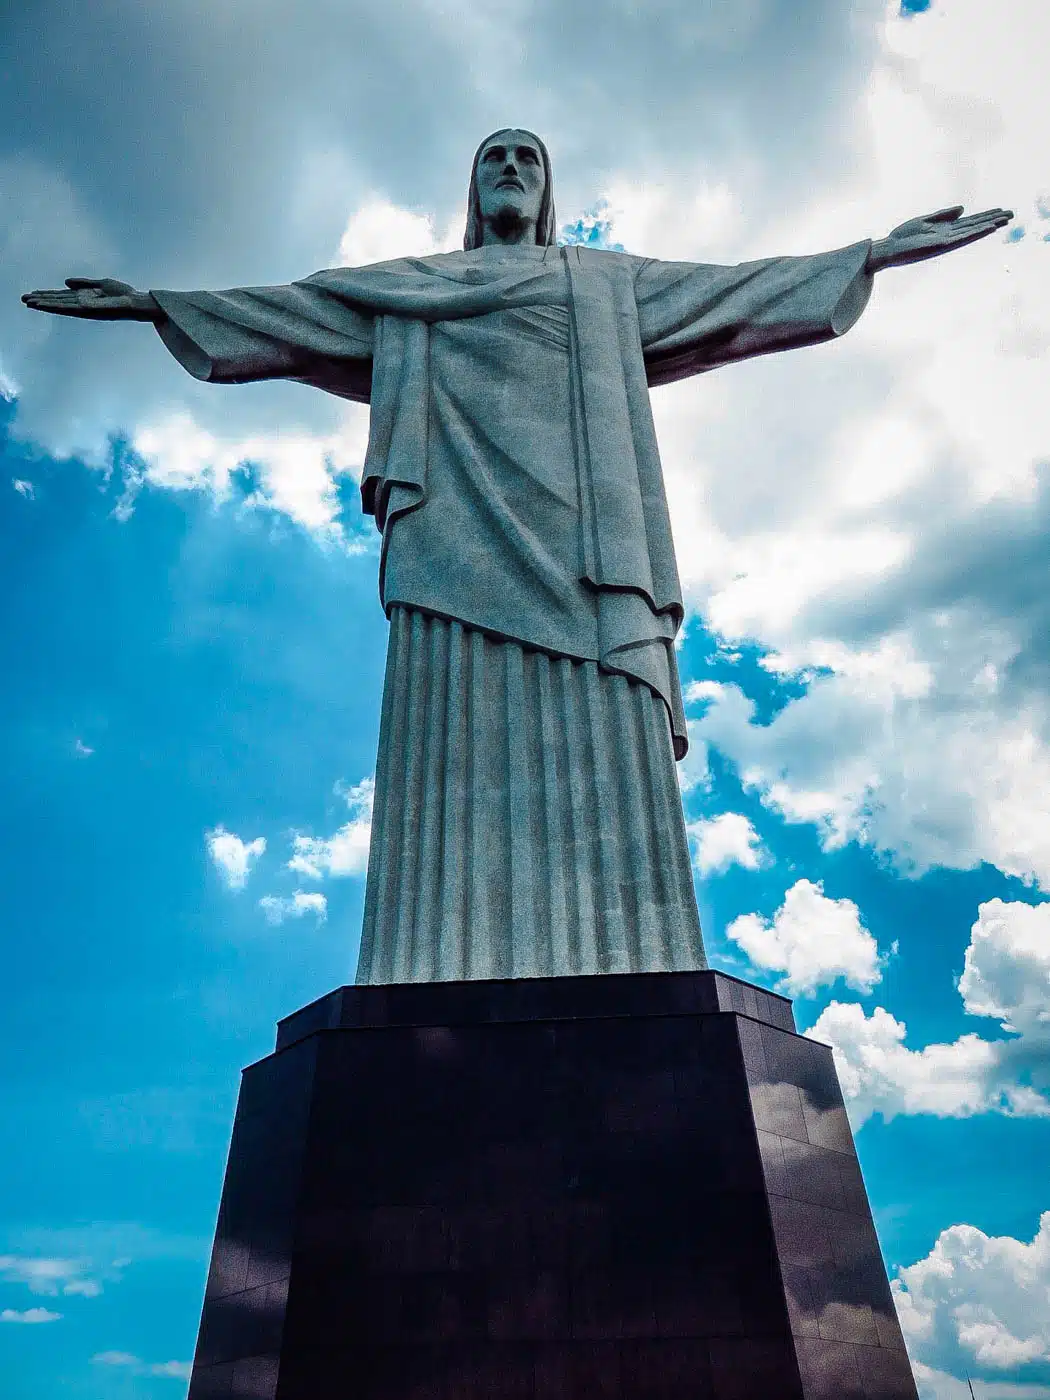 Christ the Redeemer I South America Travel Bucket List. 90 Awesome Things to do in South America When Backpacking and Travelling #southamerica #bucketlist #traveldestinations